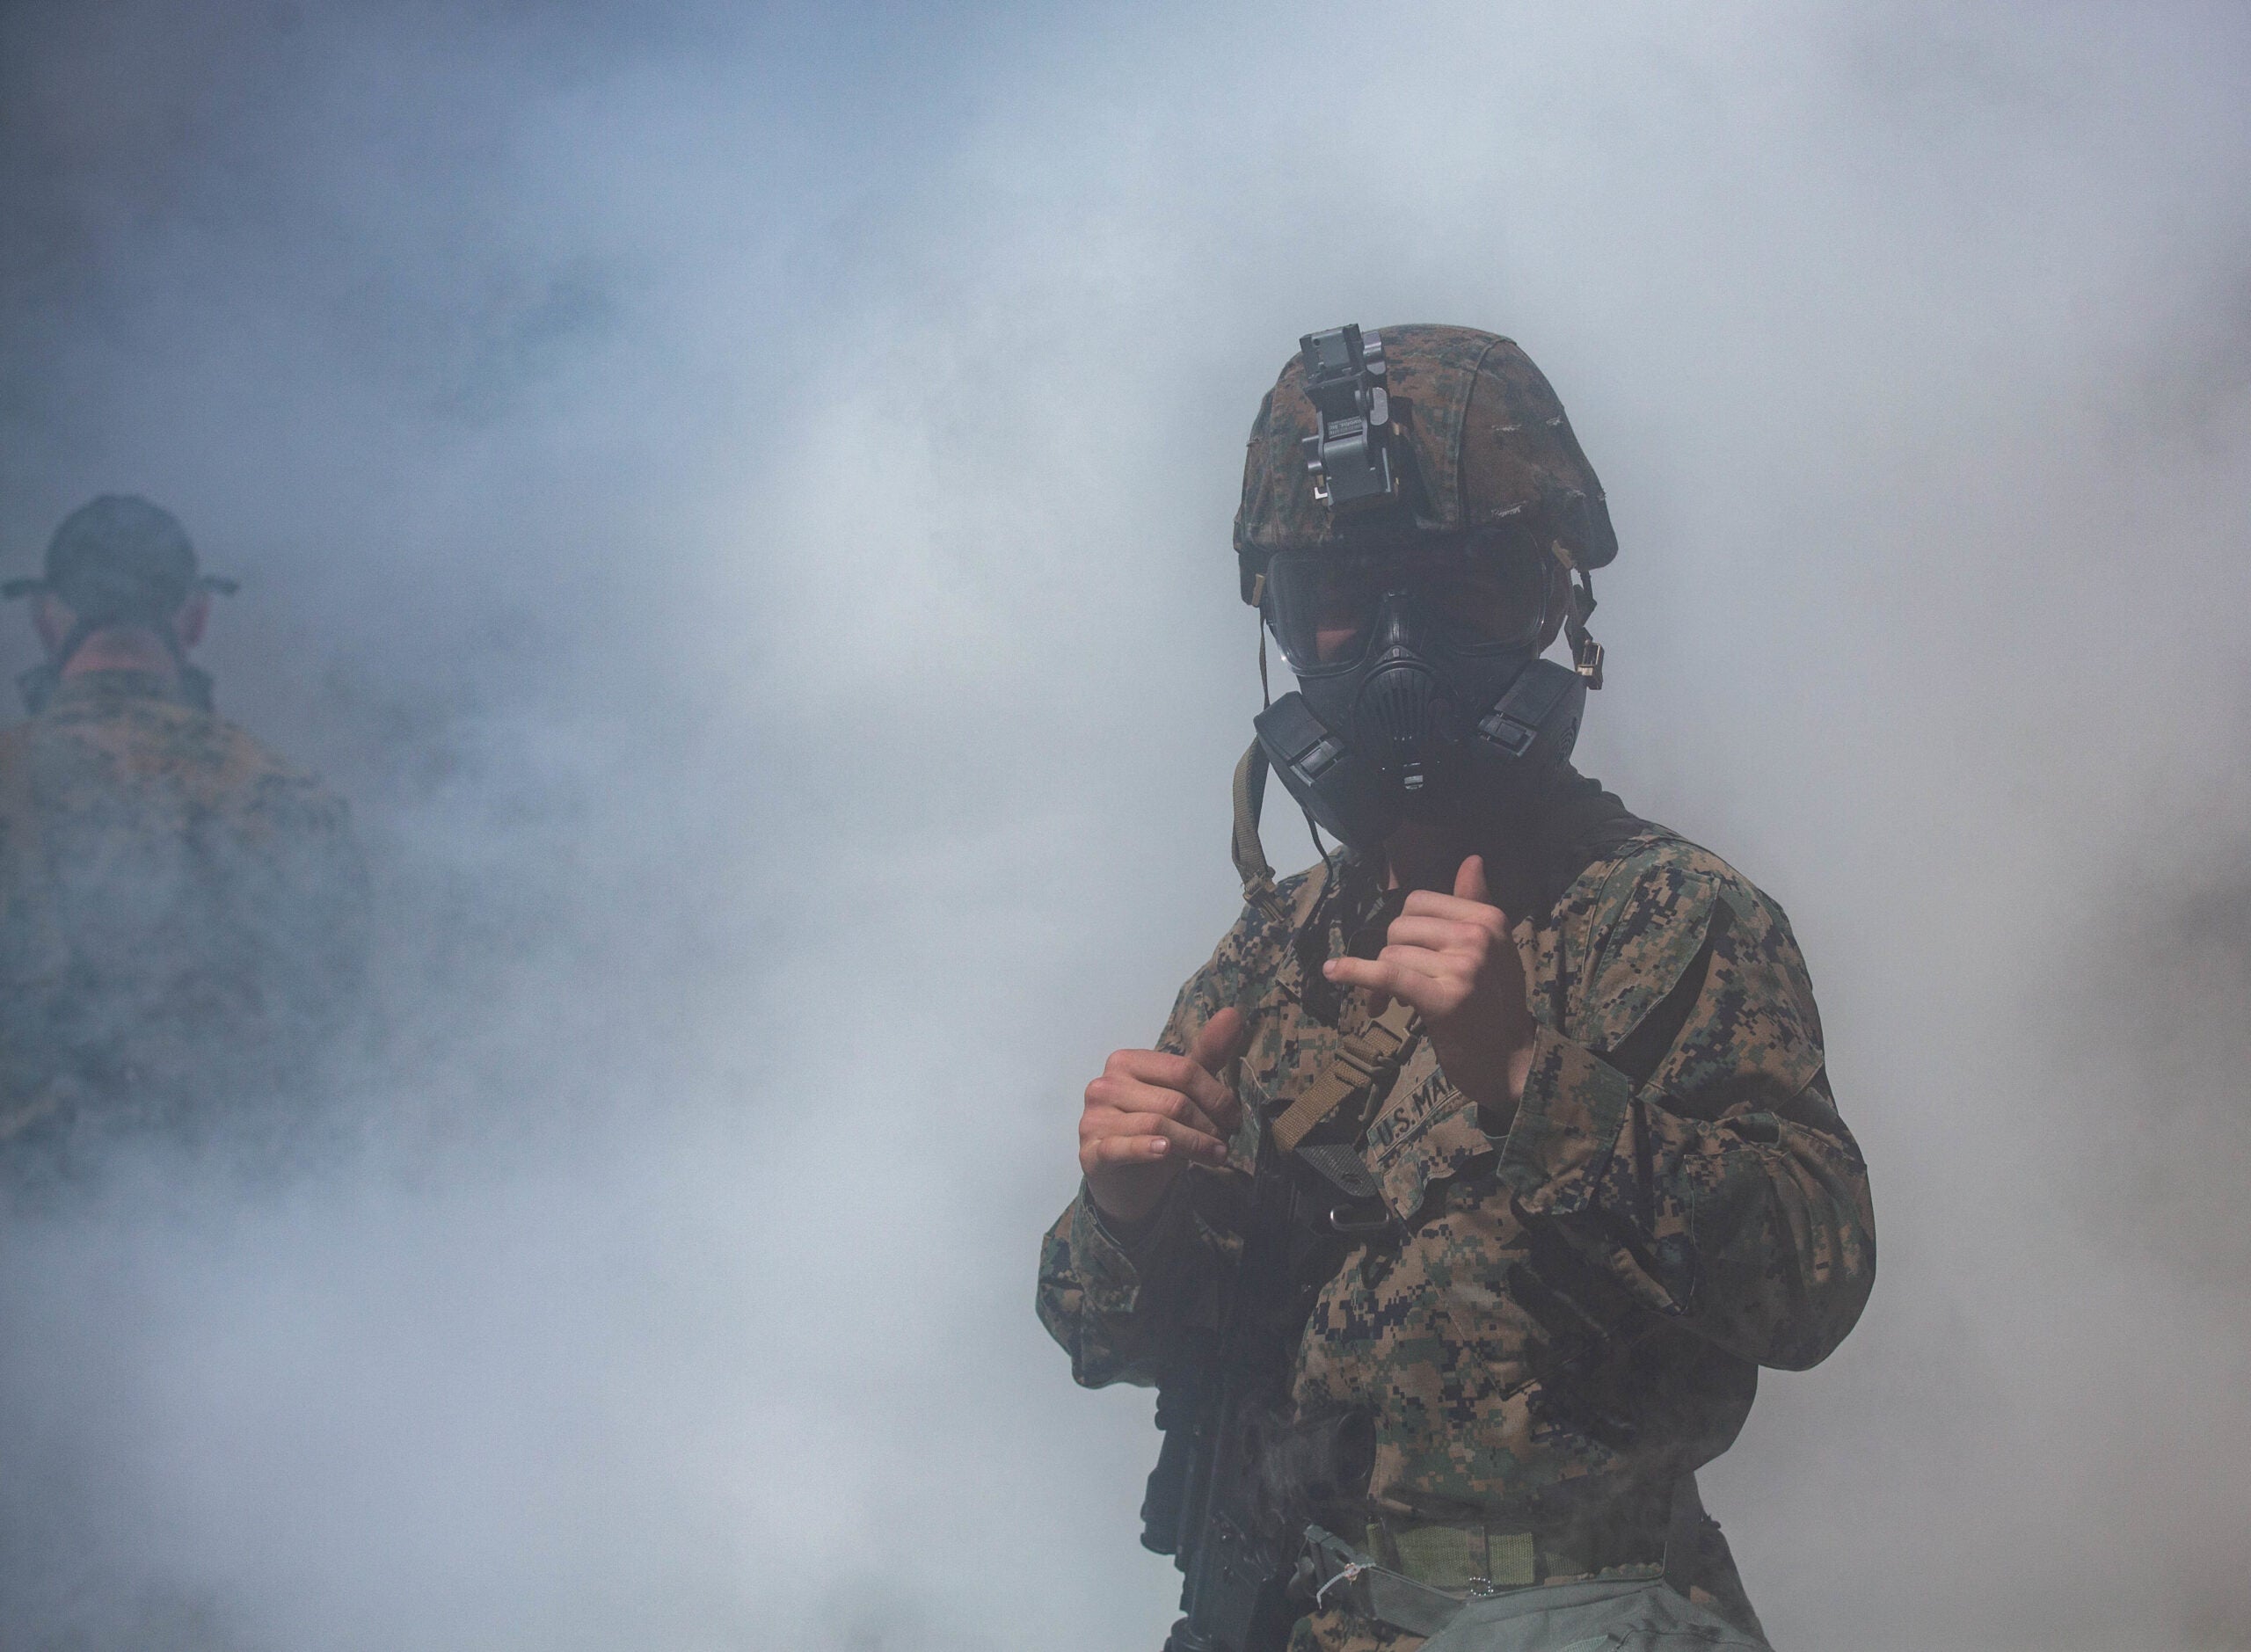 U.S. Marine Corps Cpl. David Rodriguez, a human intelligence specialist with Headquarters Company, Headquarters Battalion, 2d Marine Division  poses for a photo during a Battalion Field Exercise at Camp Lejeune, North Carolina, March 18, 2020. The  exercise focused on mission readiness, lethality, and combat effectiveness within the Division. The training included defensive combat procedures, chemical weapons readiness, communications, and convoy operations. (U.S. Marine Corps photo by Lance Cpl. Brian Bolin Jr.)